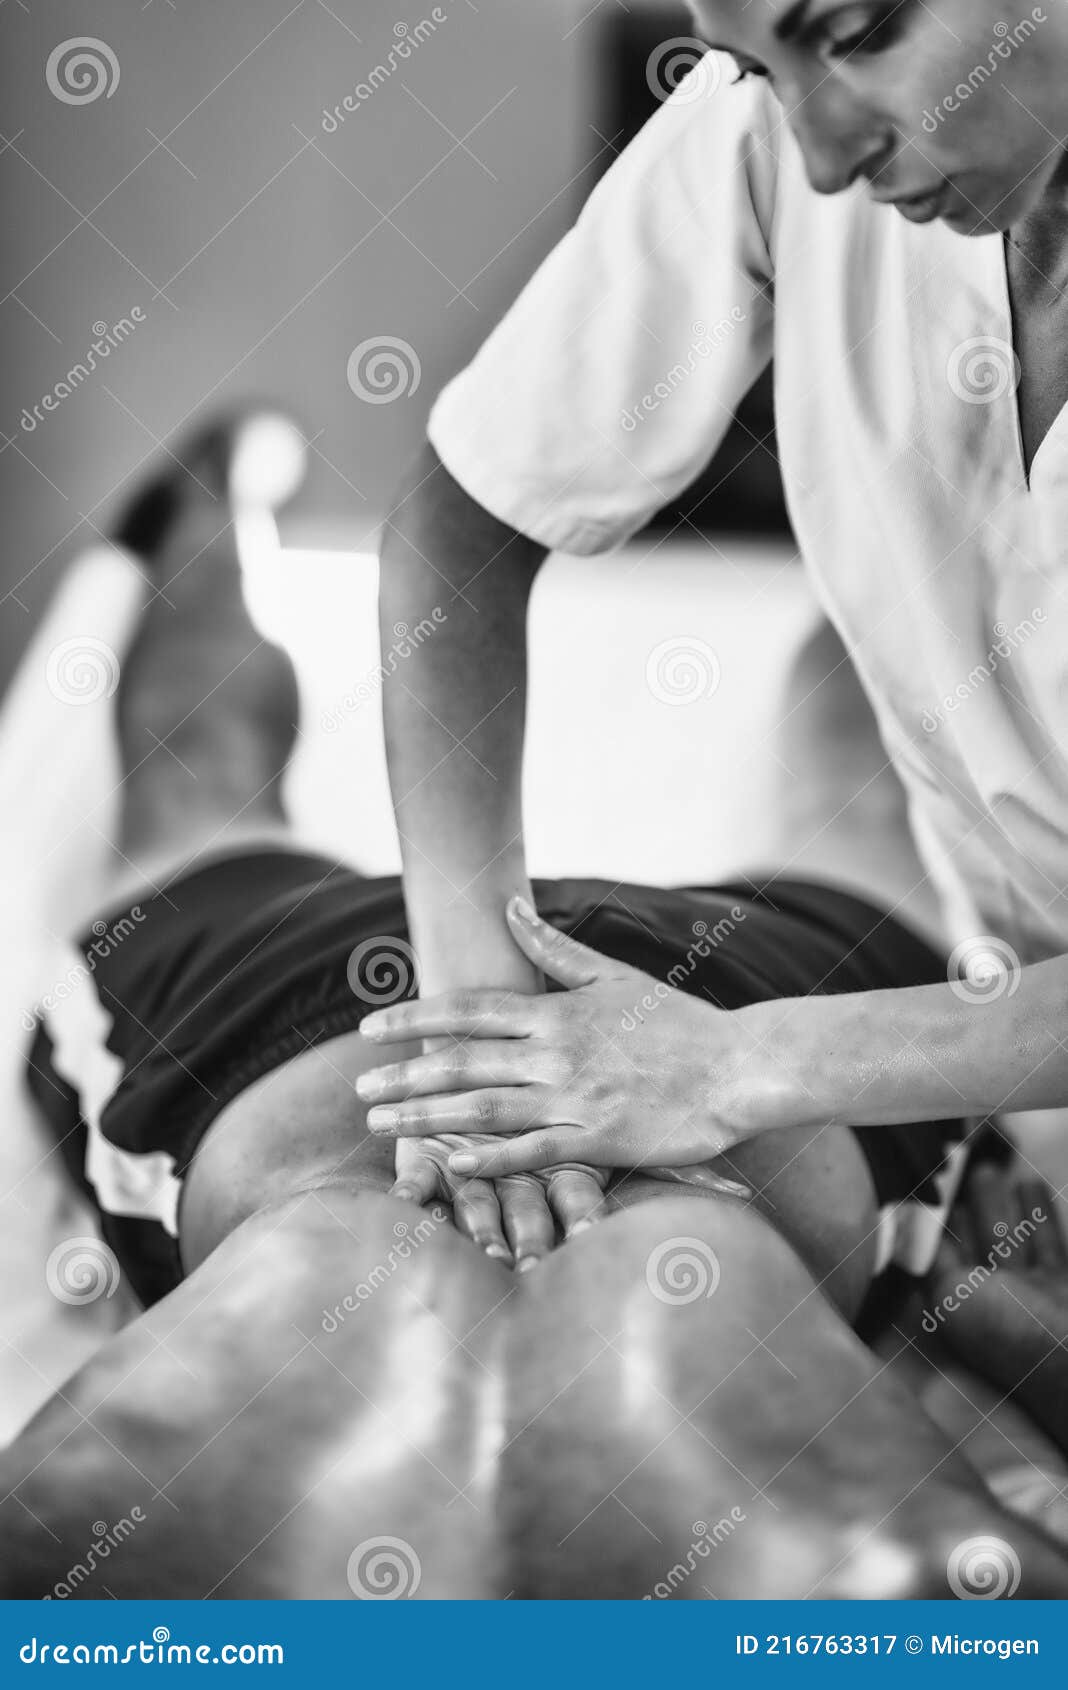 Lower back massage - Stock Image - F024/7790 - Science Photo Library